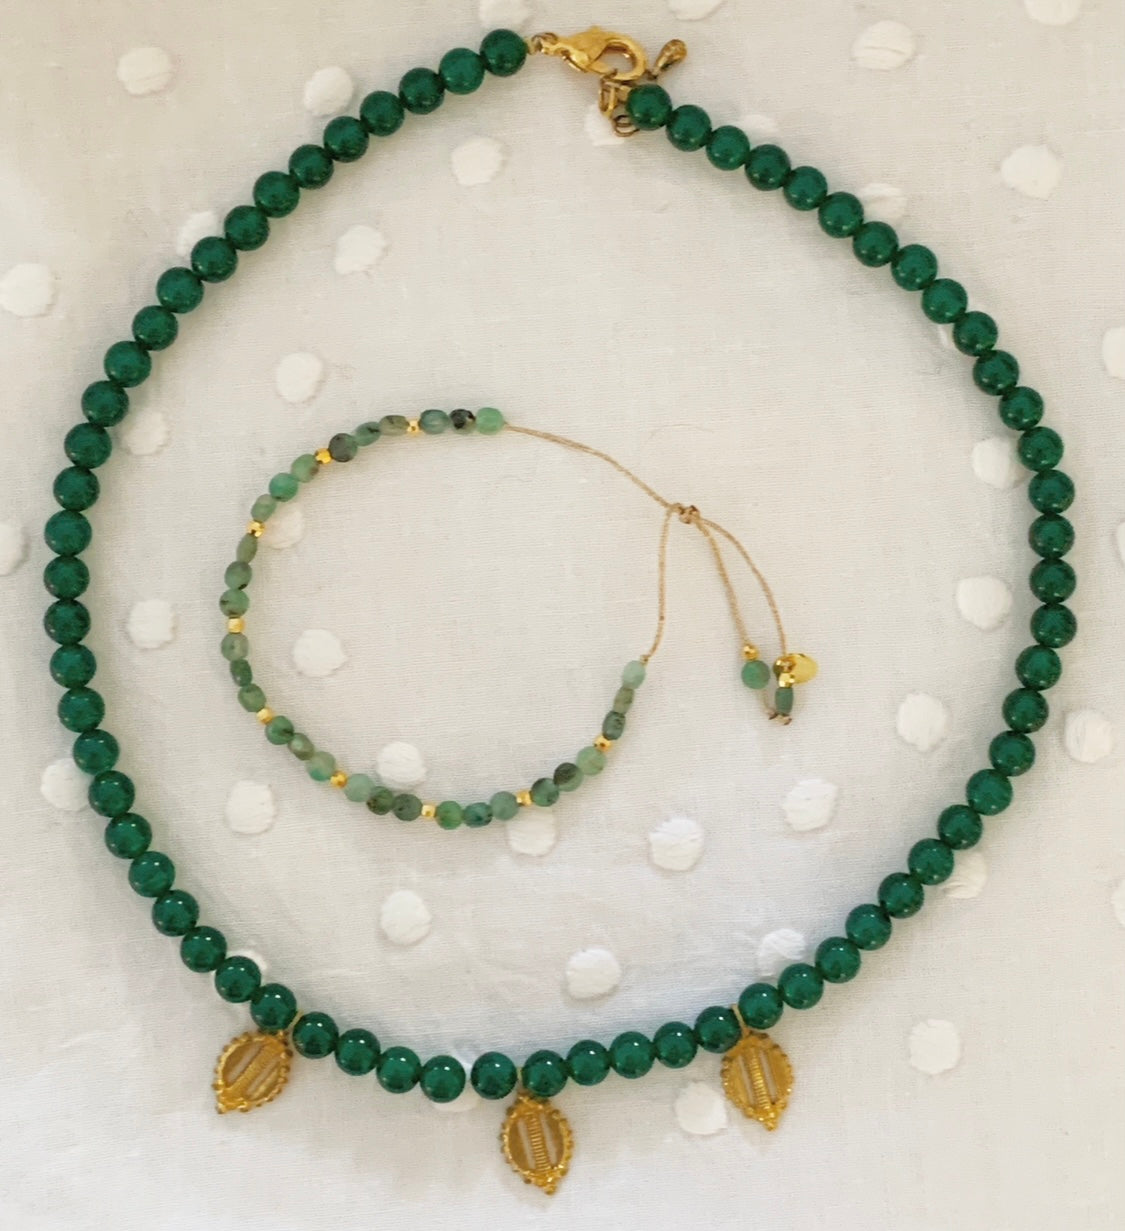 Agate stones and gold plated tassels